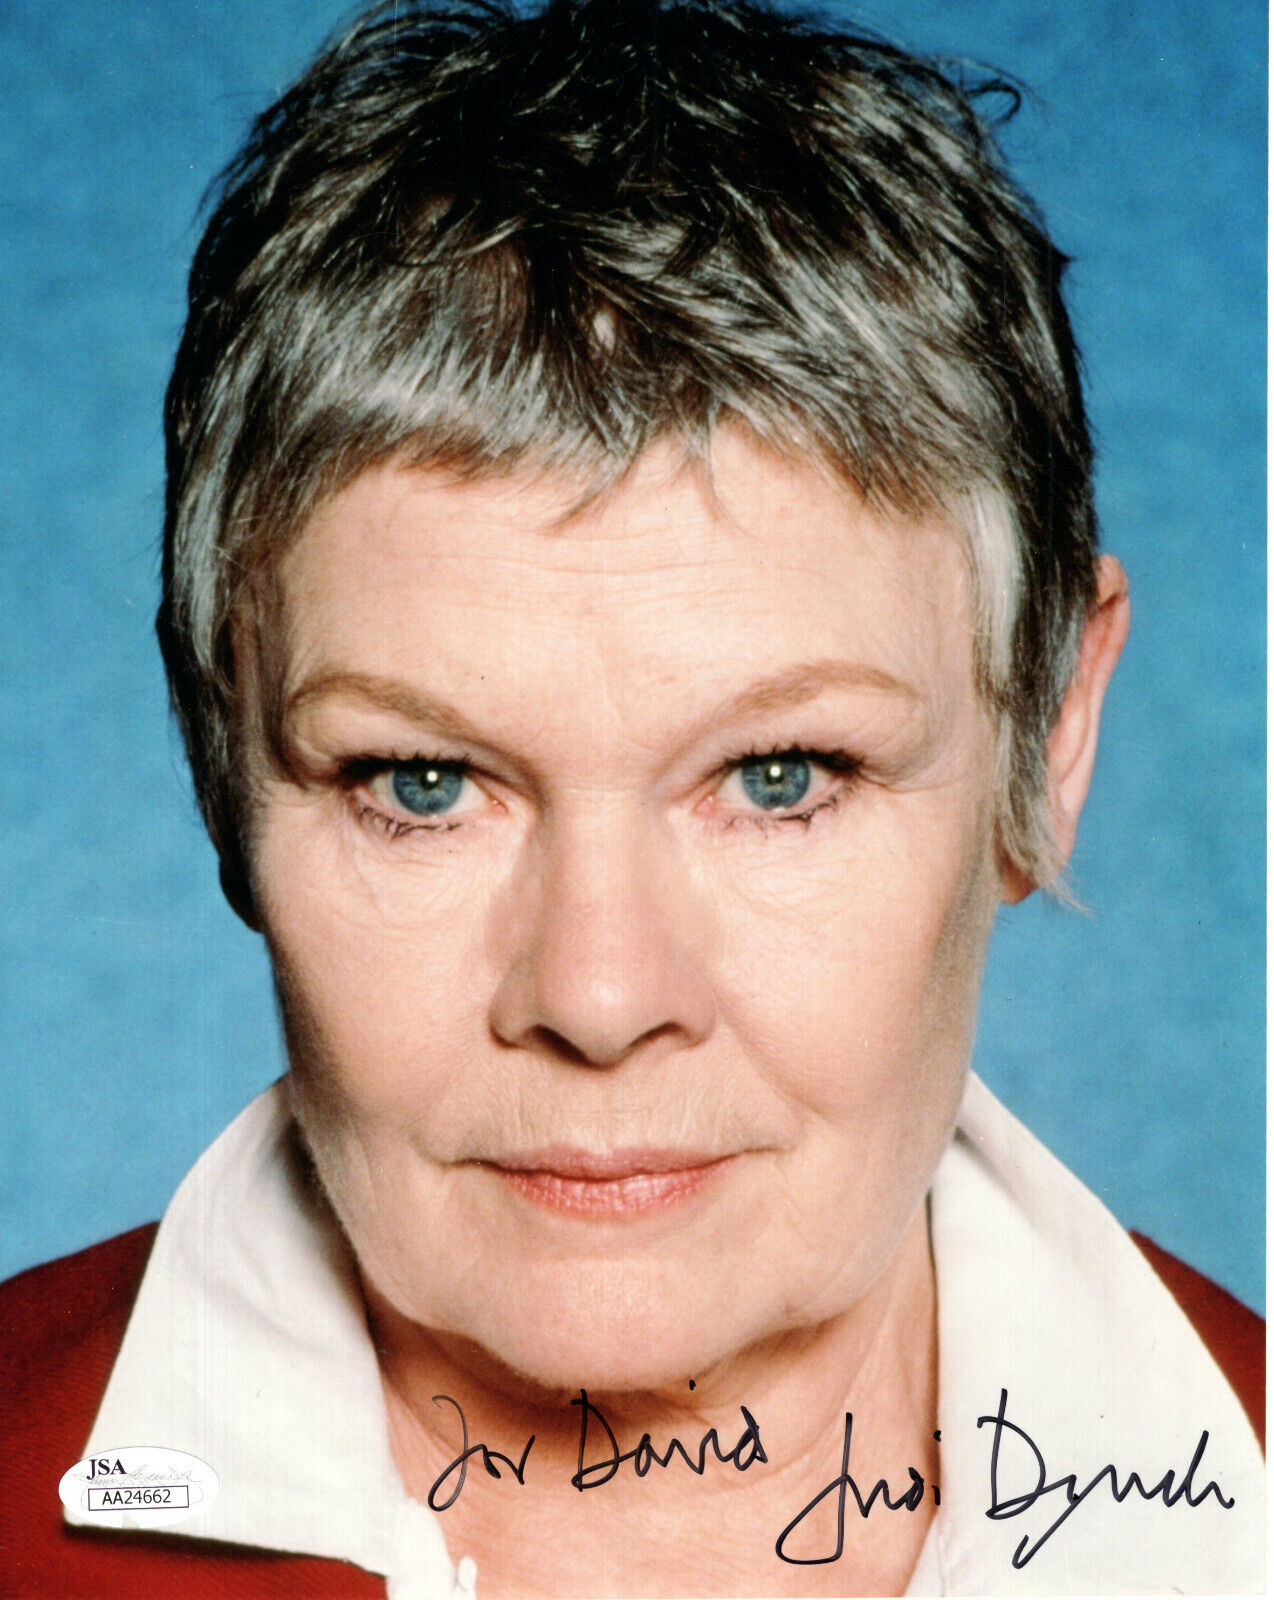 JUDI DENCH HAND SIGNED 8x10 PHOTO    AWESOME POSE FROM 007     TO DAVID      JSA